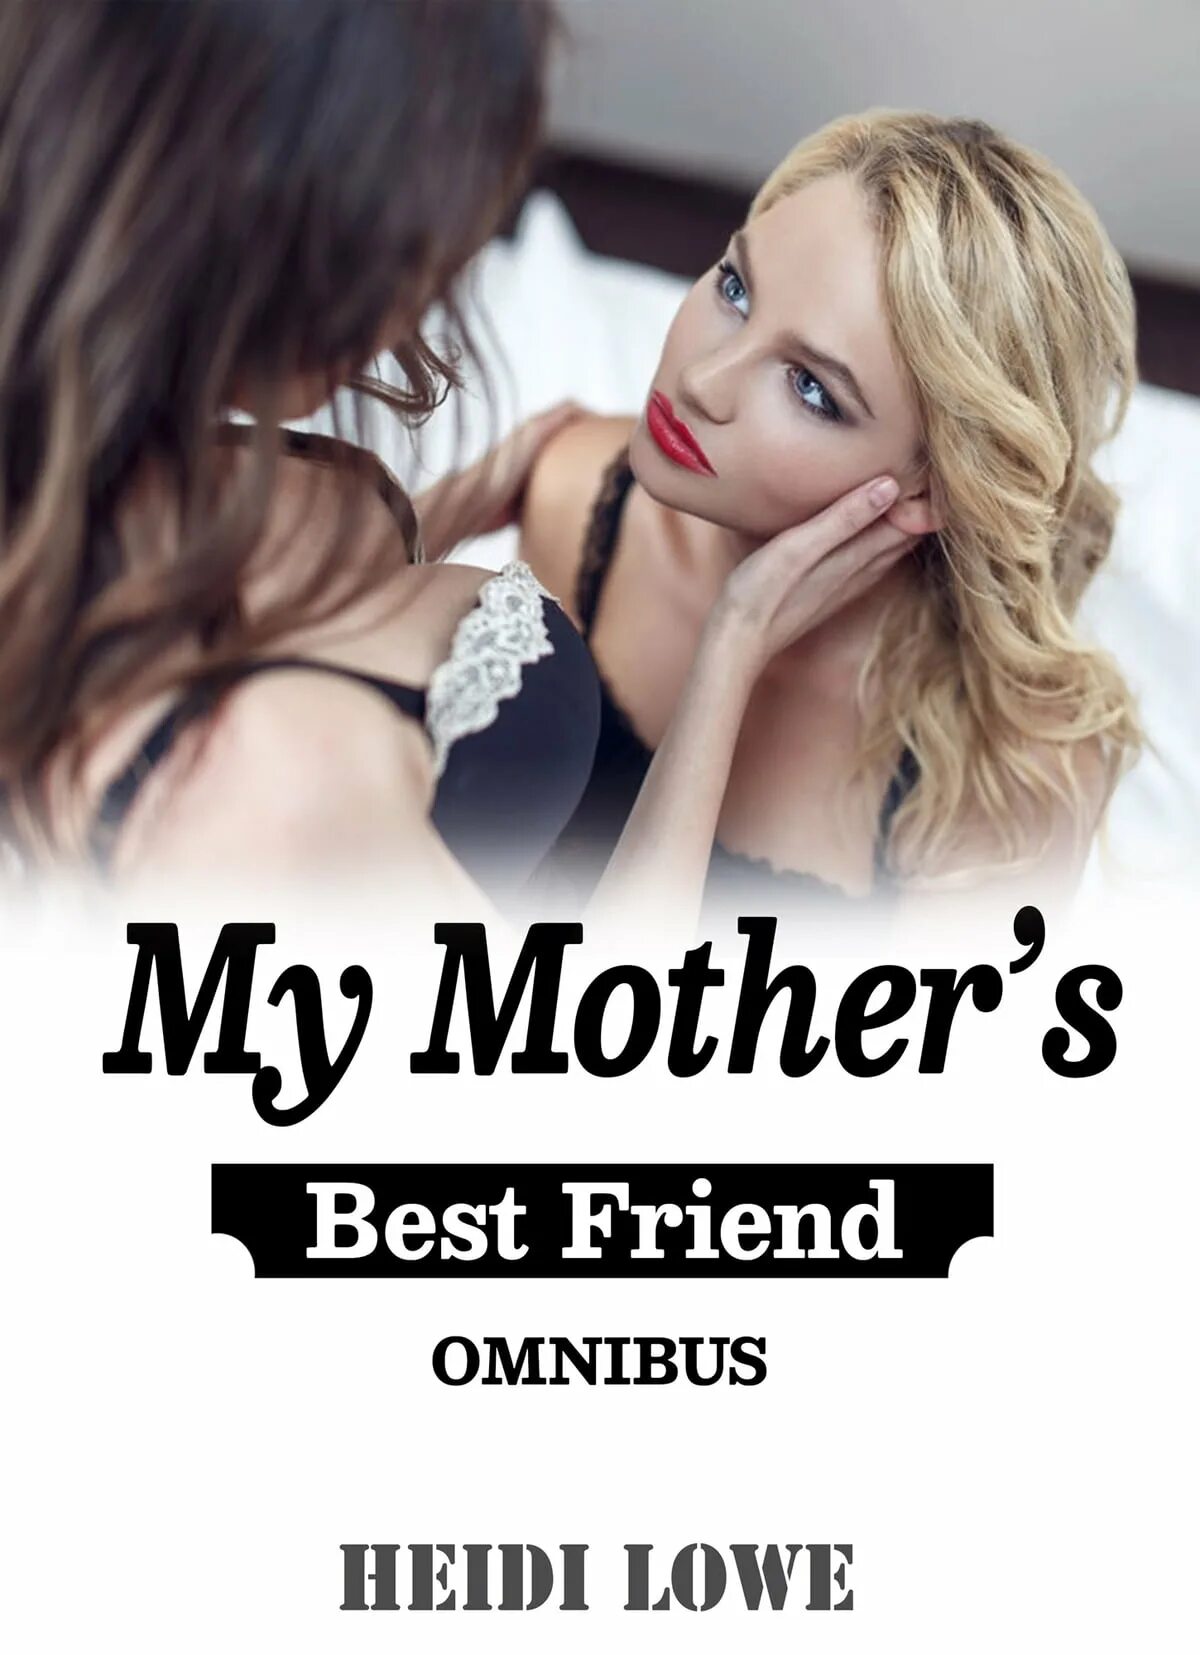 My mother best friend. Mother best friend. Mother best friend актрисы. My friend's mother. My mother.